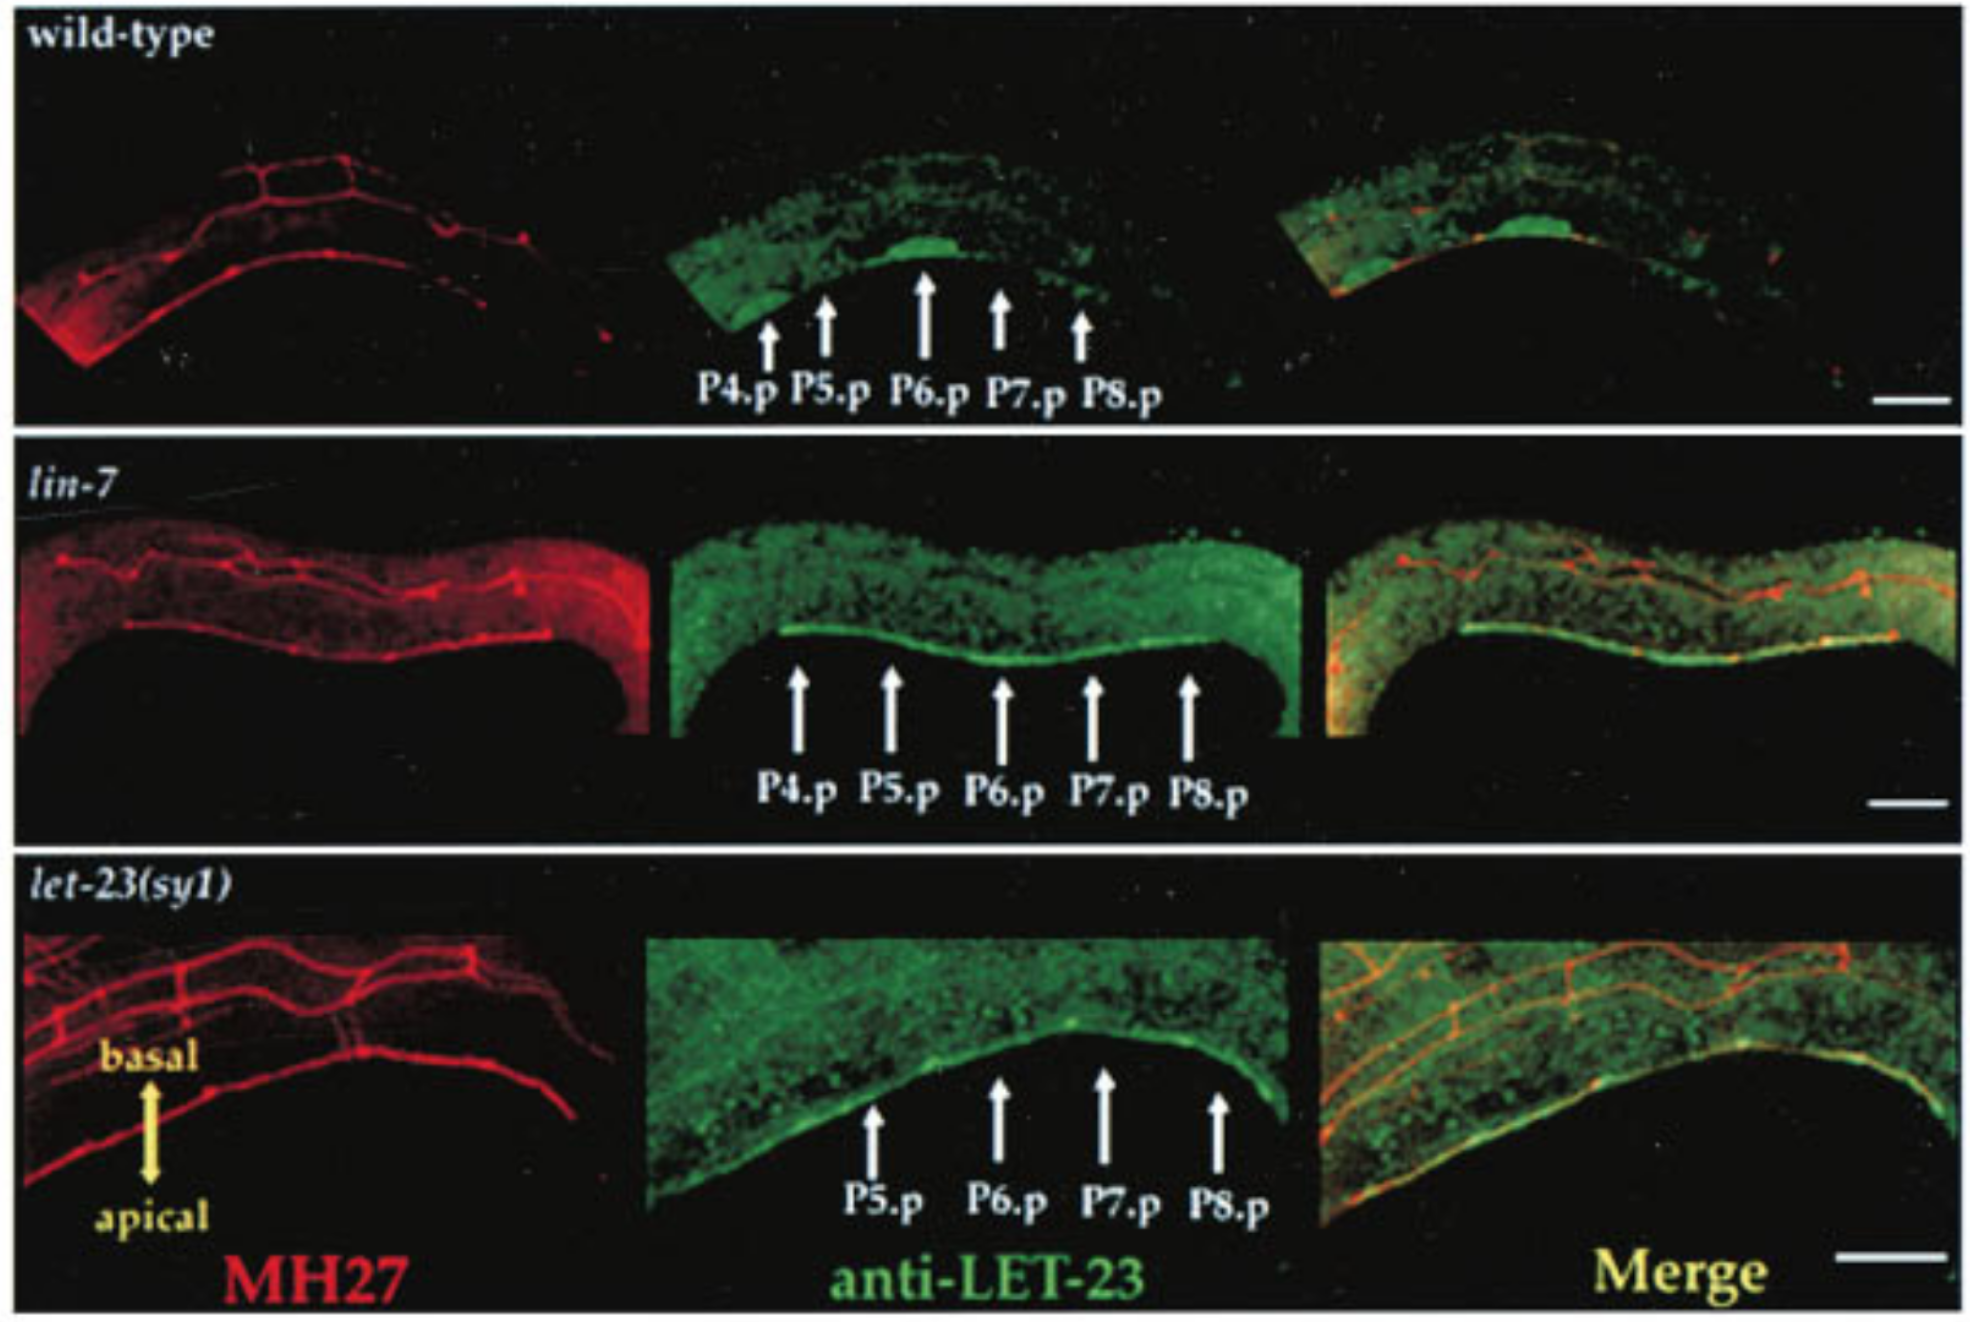 Top: LET-23 are localised to the basolateral membrane of VPCs in wild-type C. elegans; Middle: lin-7 mutant shows mislocalisation of LET-23 to the apical membrane; Bottom: let-23(sy1) mutant, in which a premature stop codon removes 6 C-terminal amino acids of LET-23, similarly resulted in mislocalisation of LET-23. LET-23 staining is shownin green, and staining for the cell junctions using the monoclonal antibody MH27 is shown in red. Reproduced from 24.